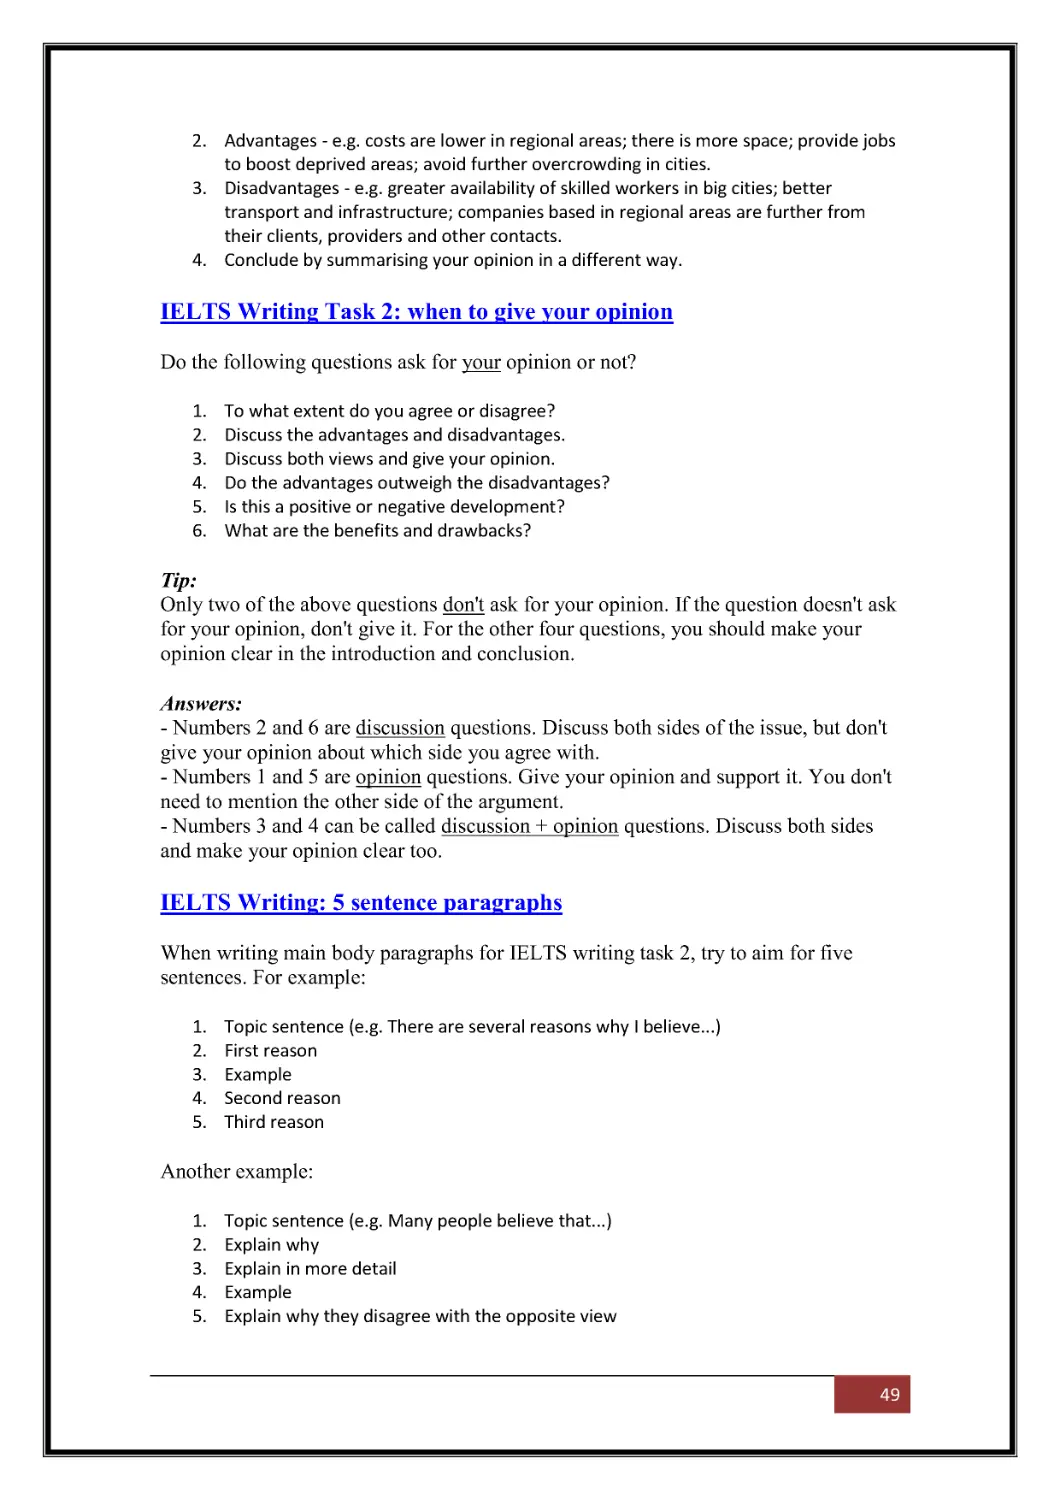 UIELTS Writing Task 2: when to give your opinionU
UIELTS Writing: 5 sentence paragraphsU